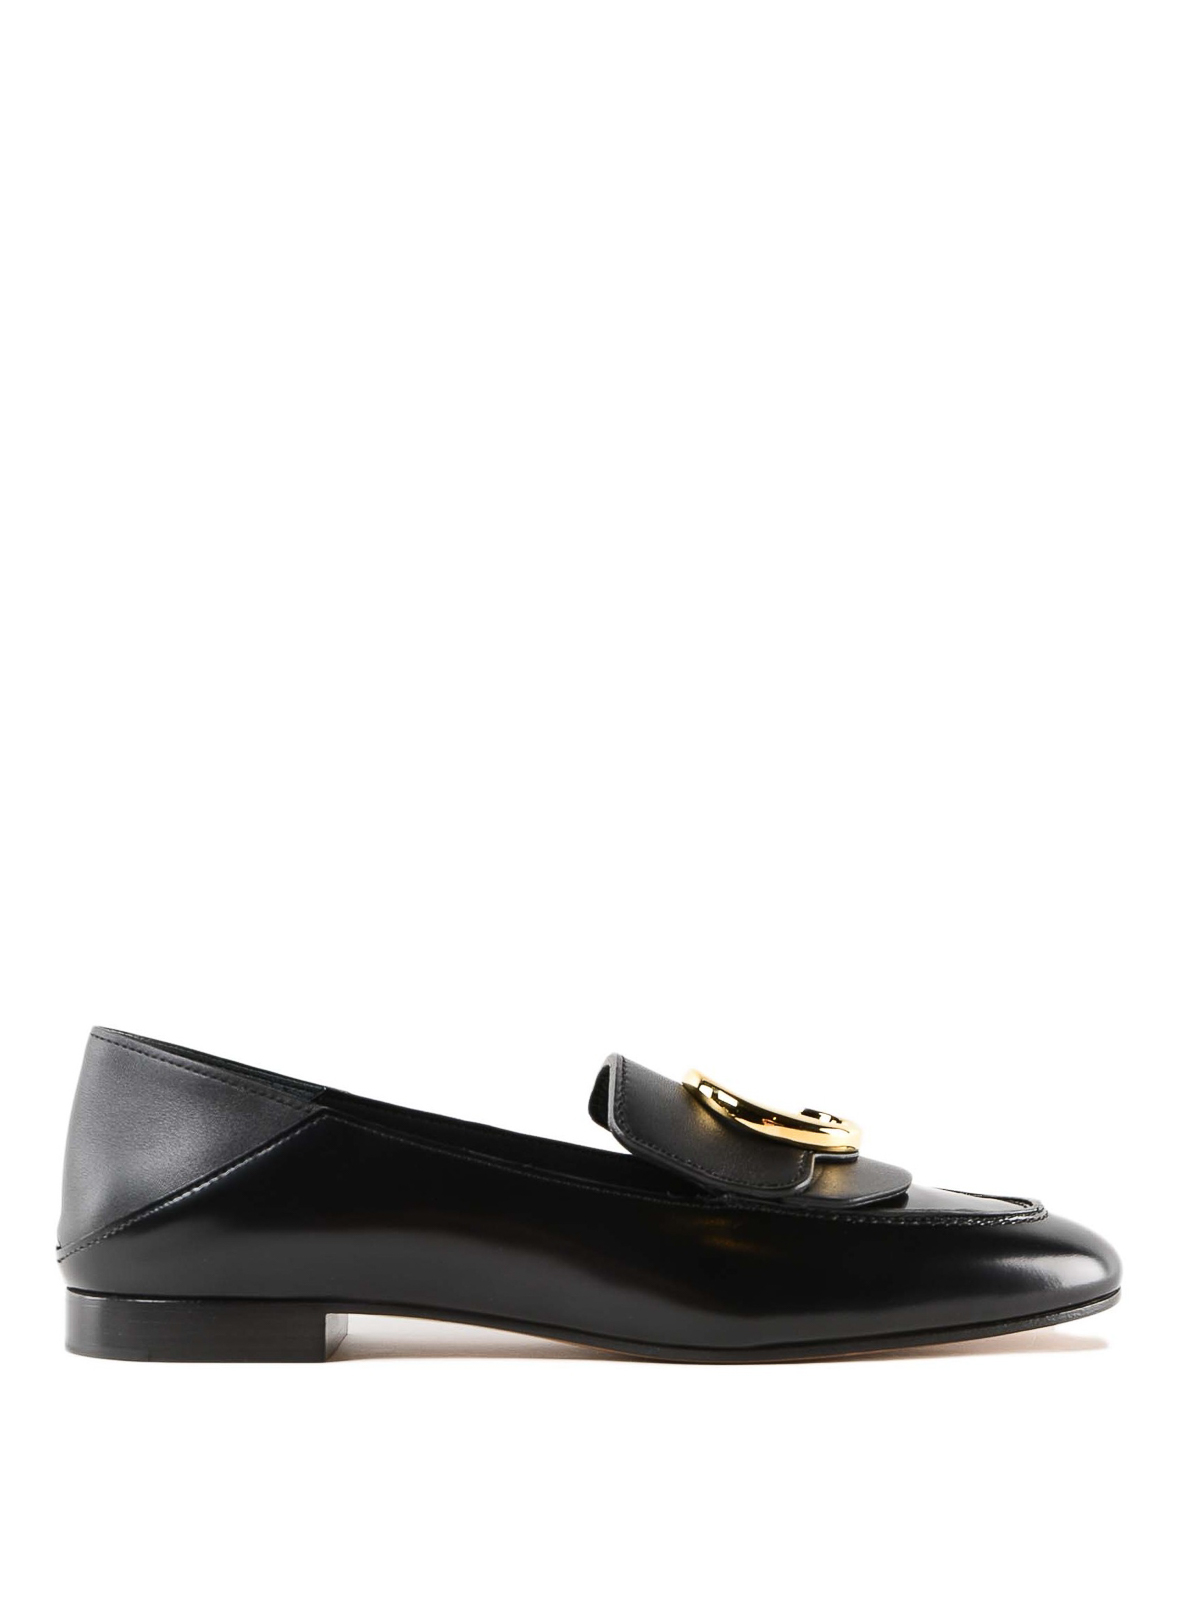 Loafers & Slippers Chloe' - Chloé black leather loafers - CHC19S13306001